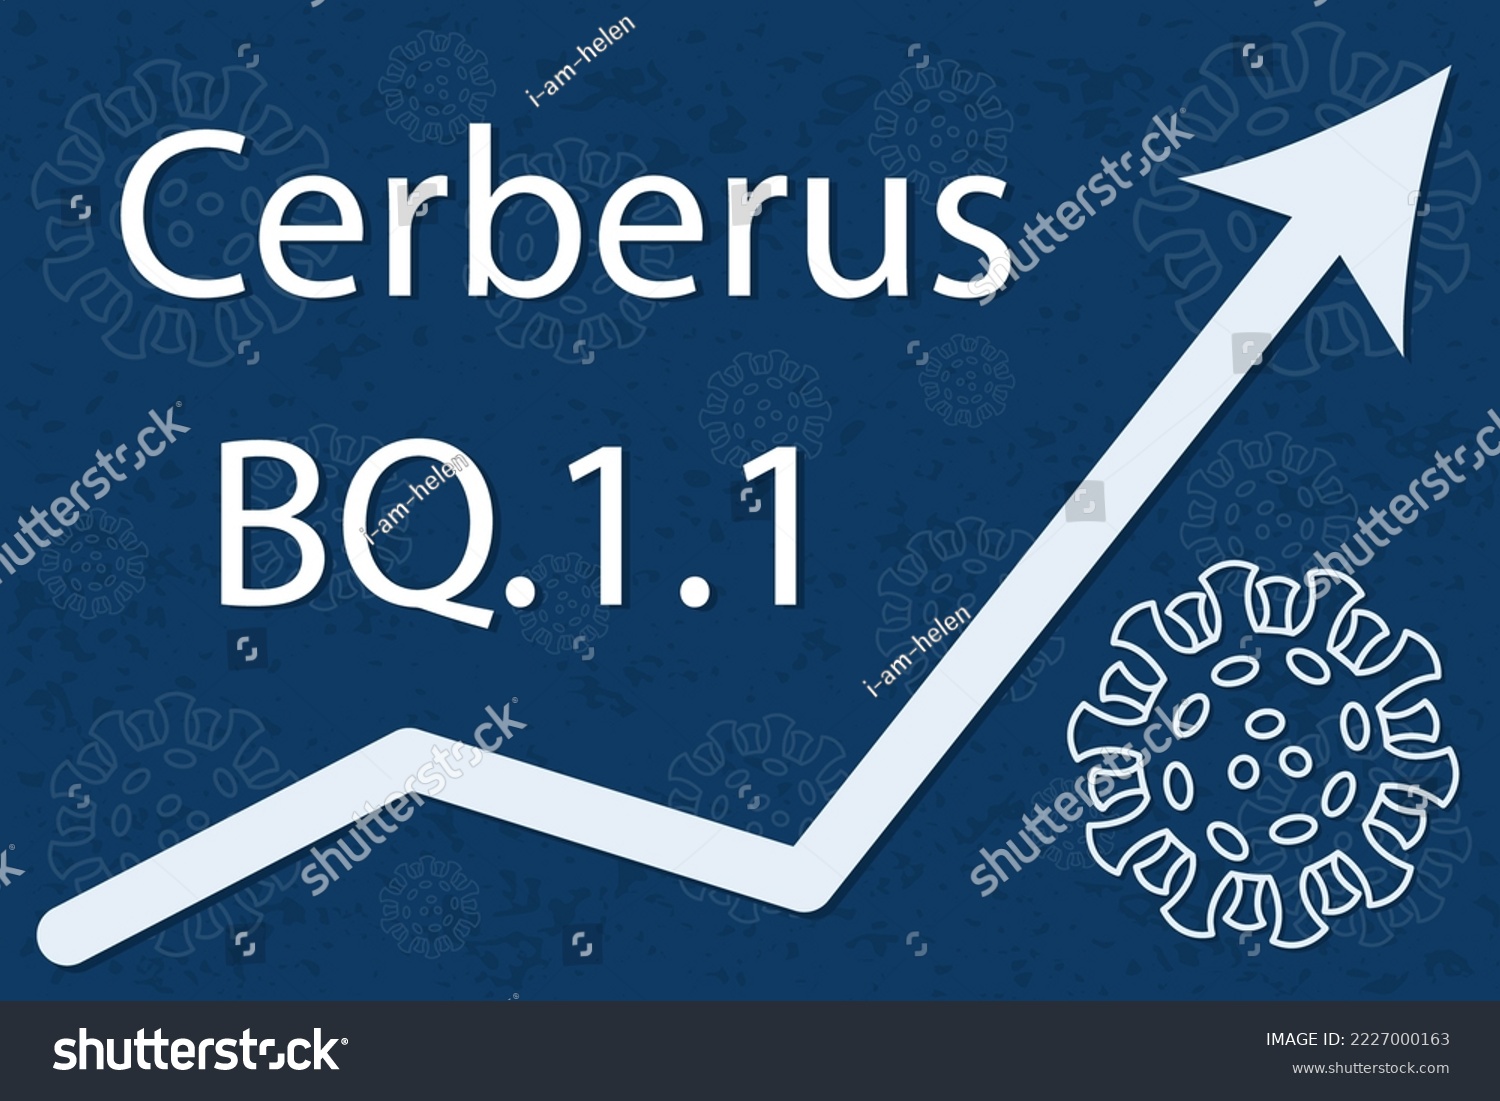 SVG of A new coronavirus variant BQ.1.1, sublineage of Omicron BA.5.  Nickname Cerberus. The arrow shows a dramatic increase in disease. White text on dark blue background with images of coronavirus. svg